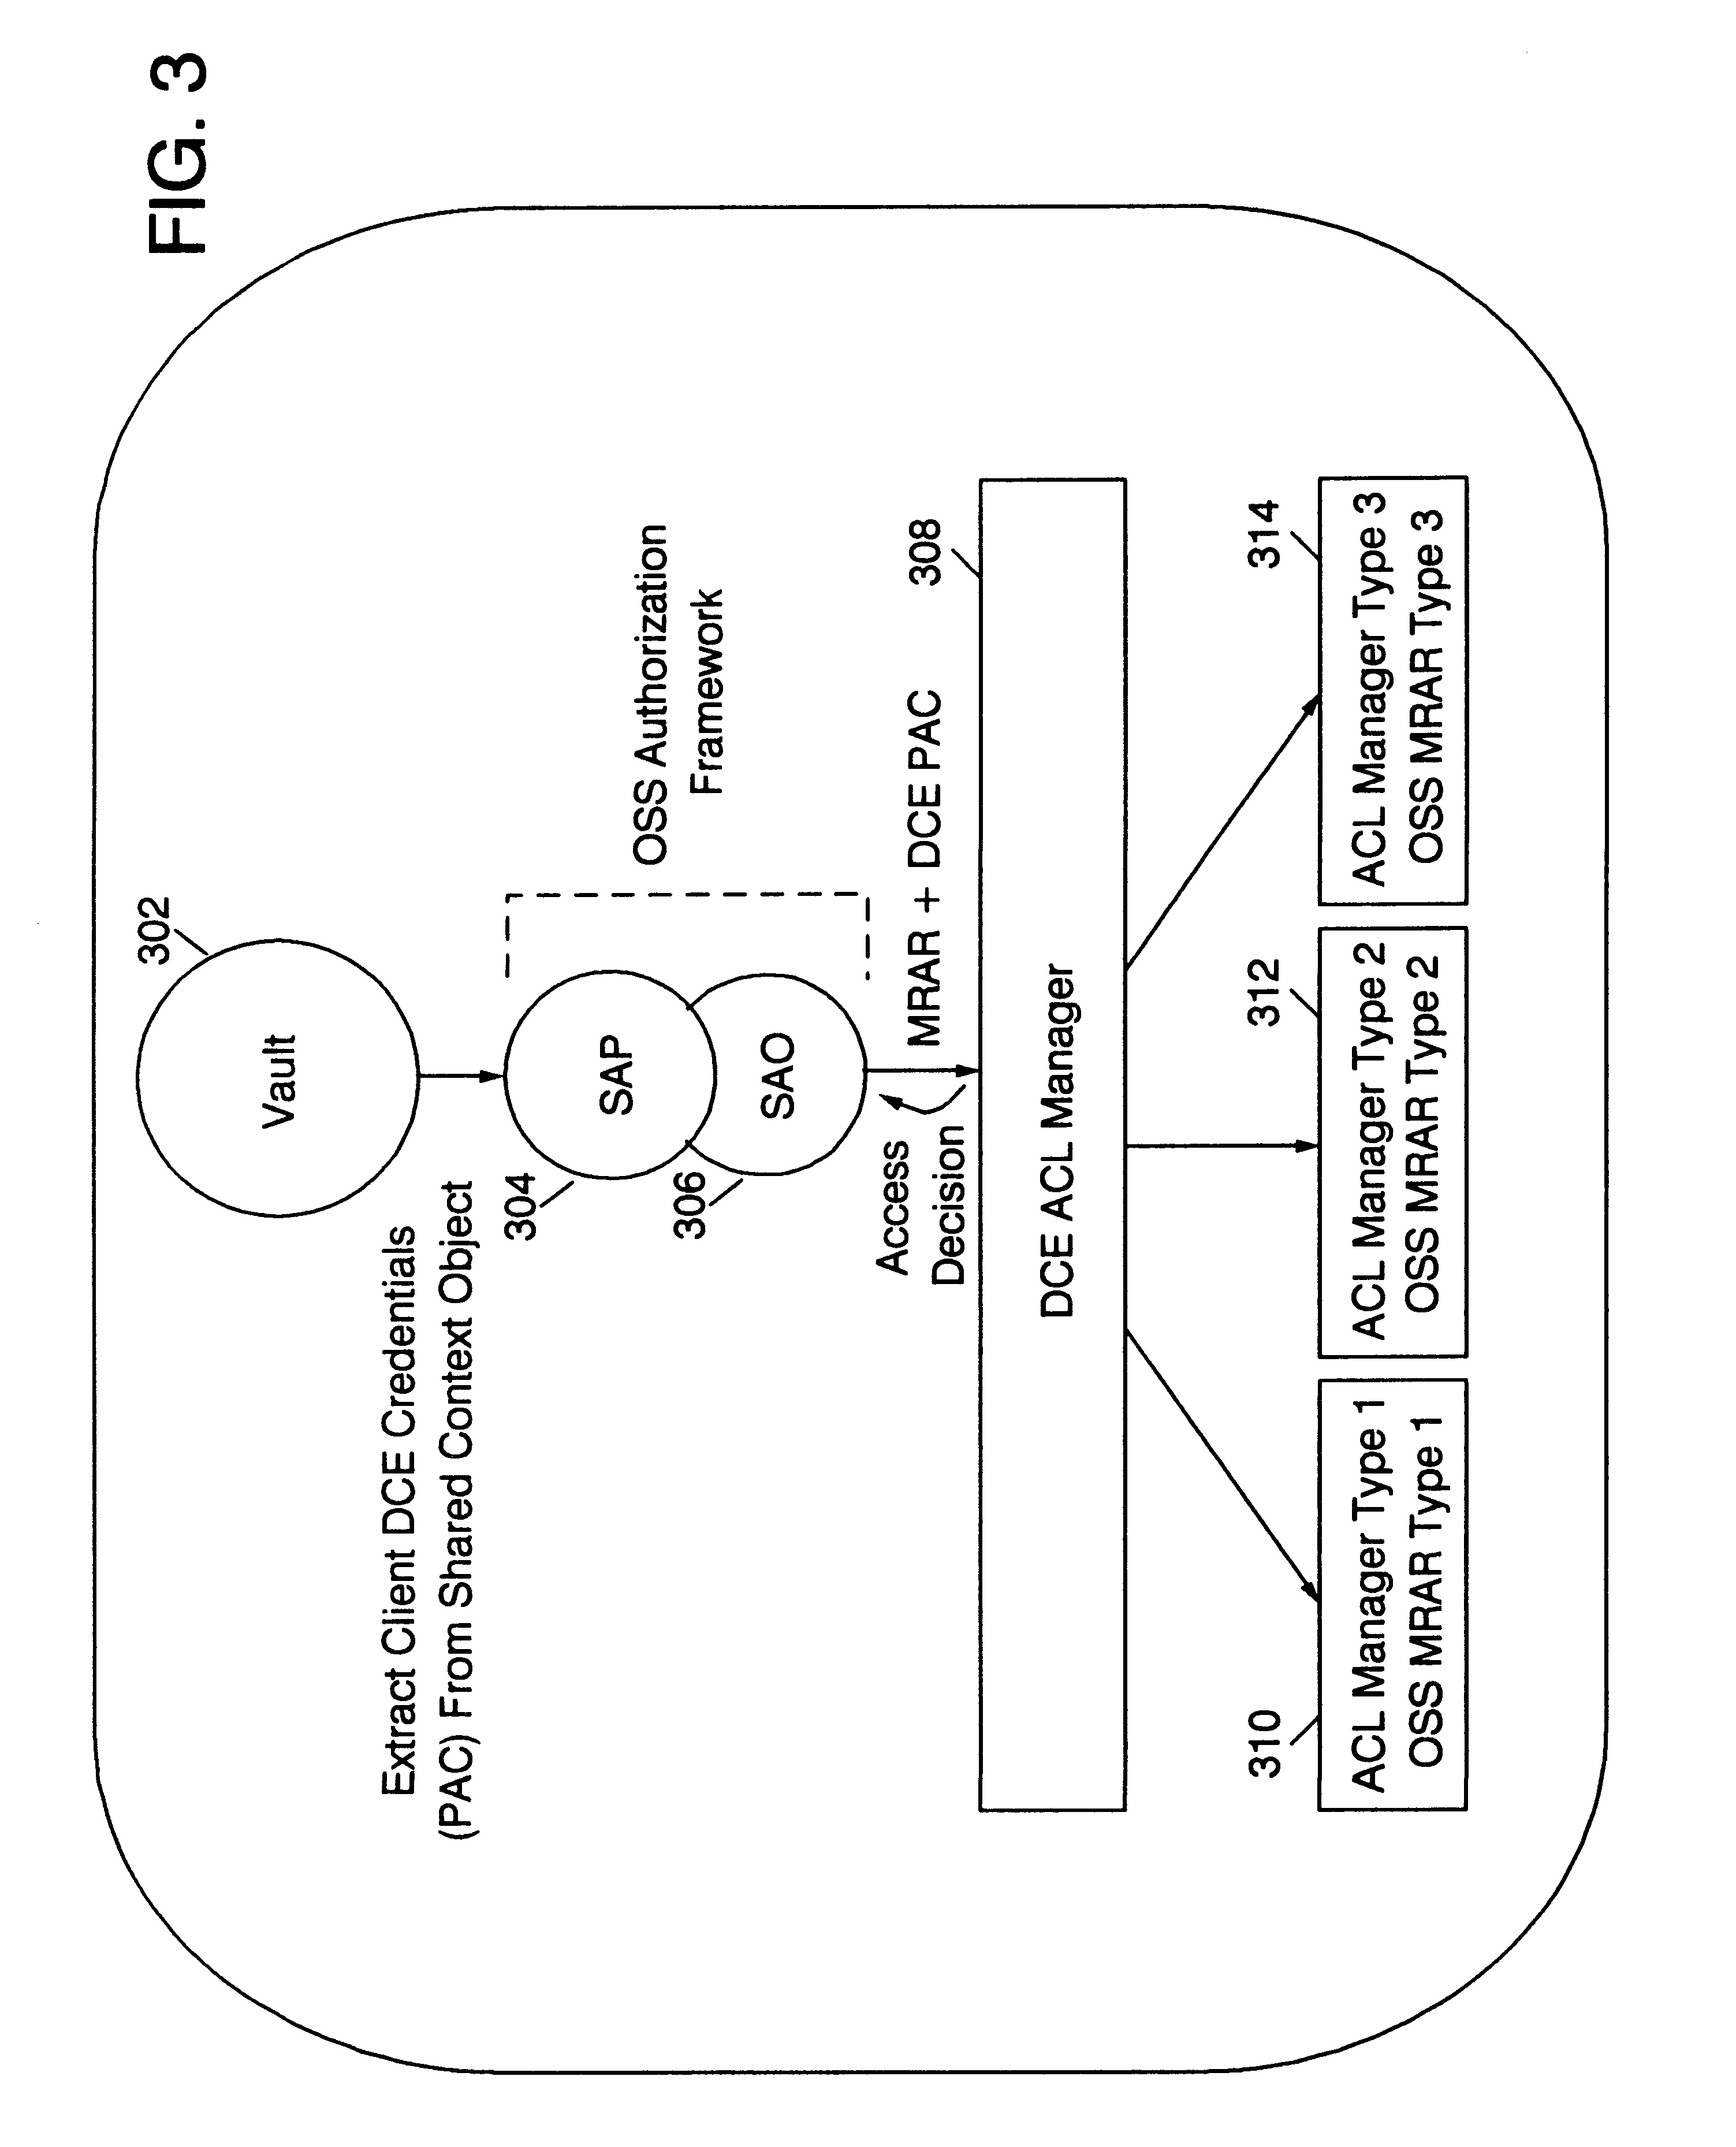 Information handling system, method, and article of manufacture including integration of object security service authorization with a distributed computing environment